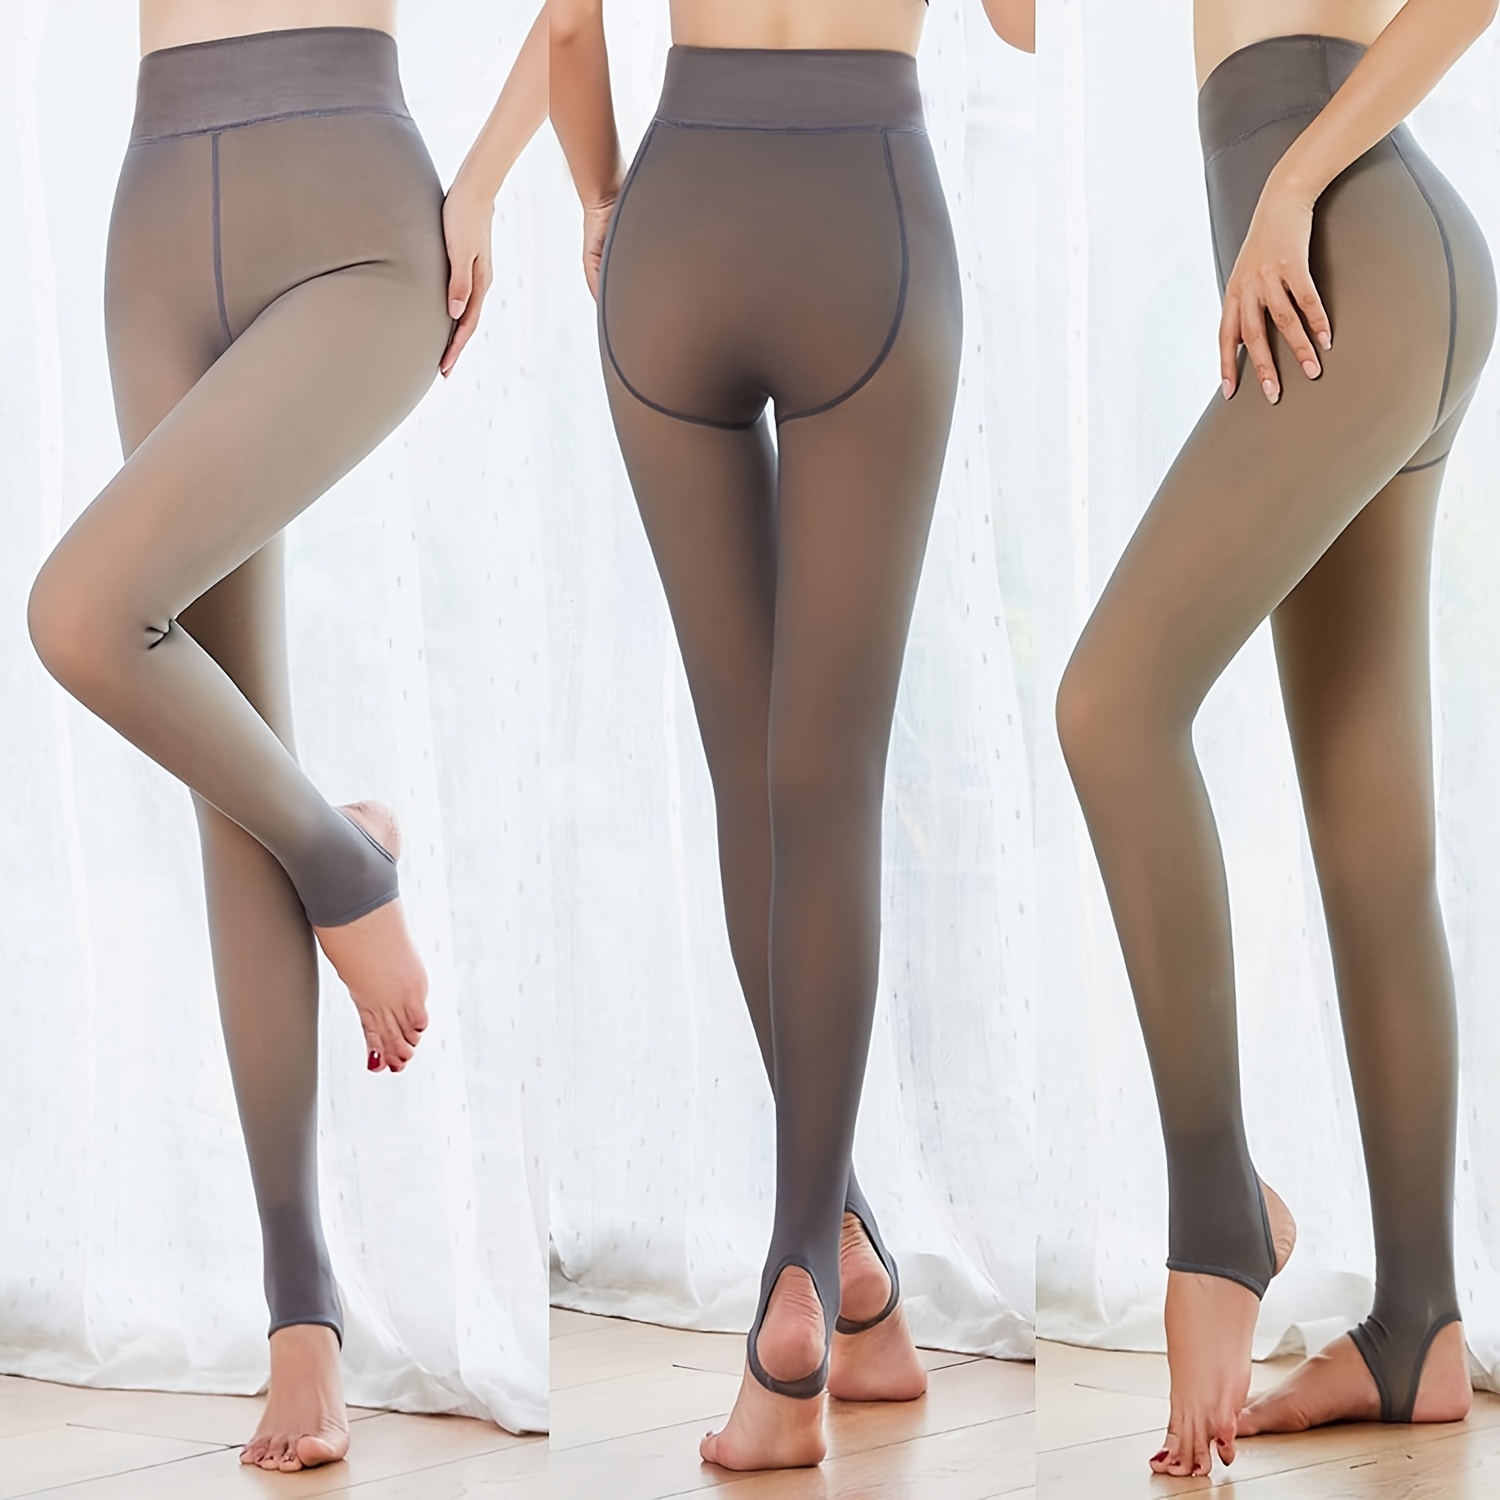 2pairs/set] 300g Plus Size Opaque Tights With Fleece Lining, Thick